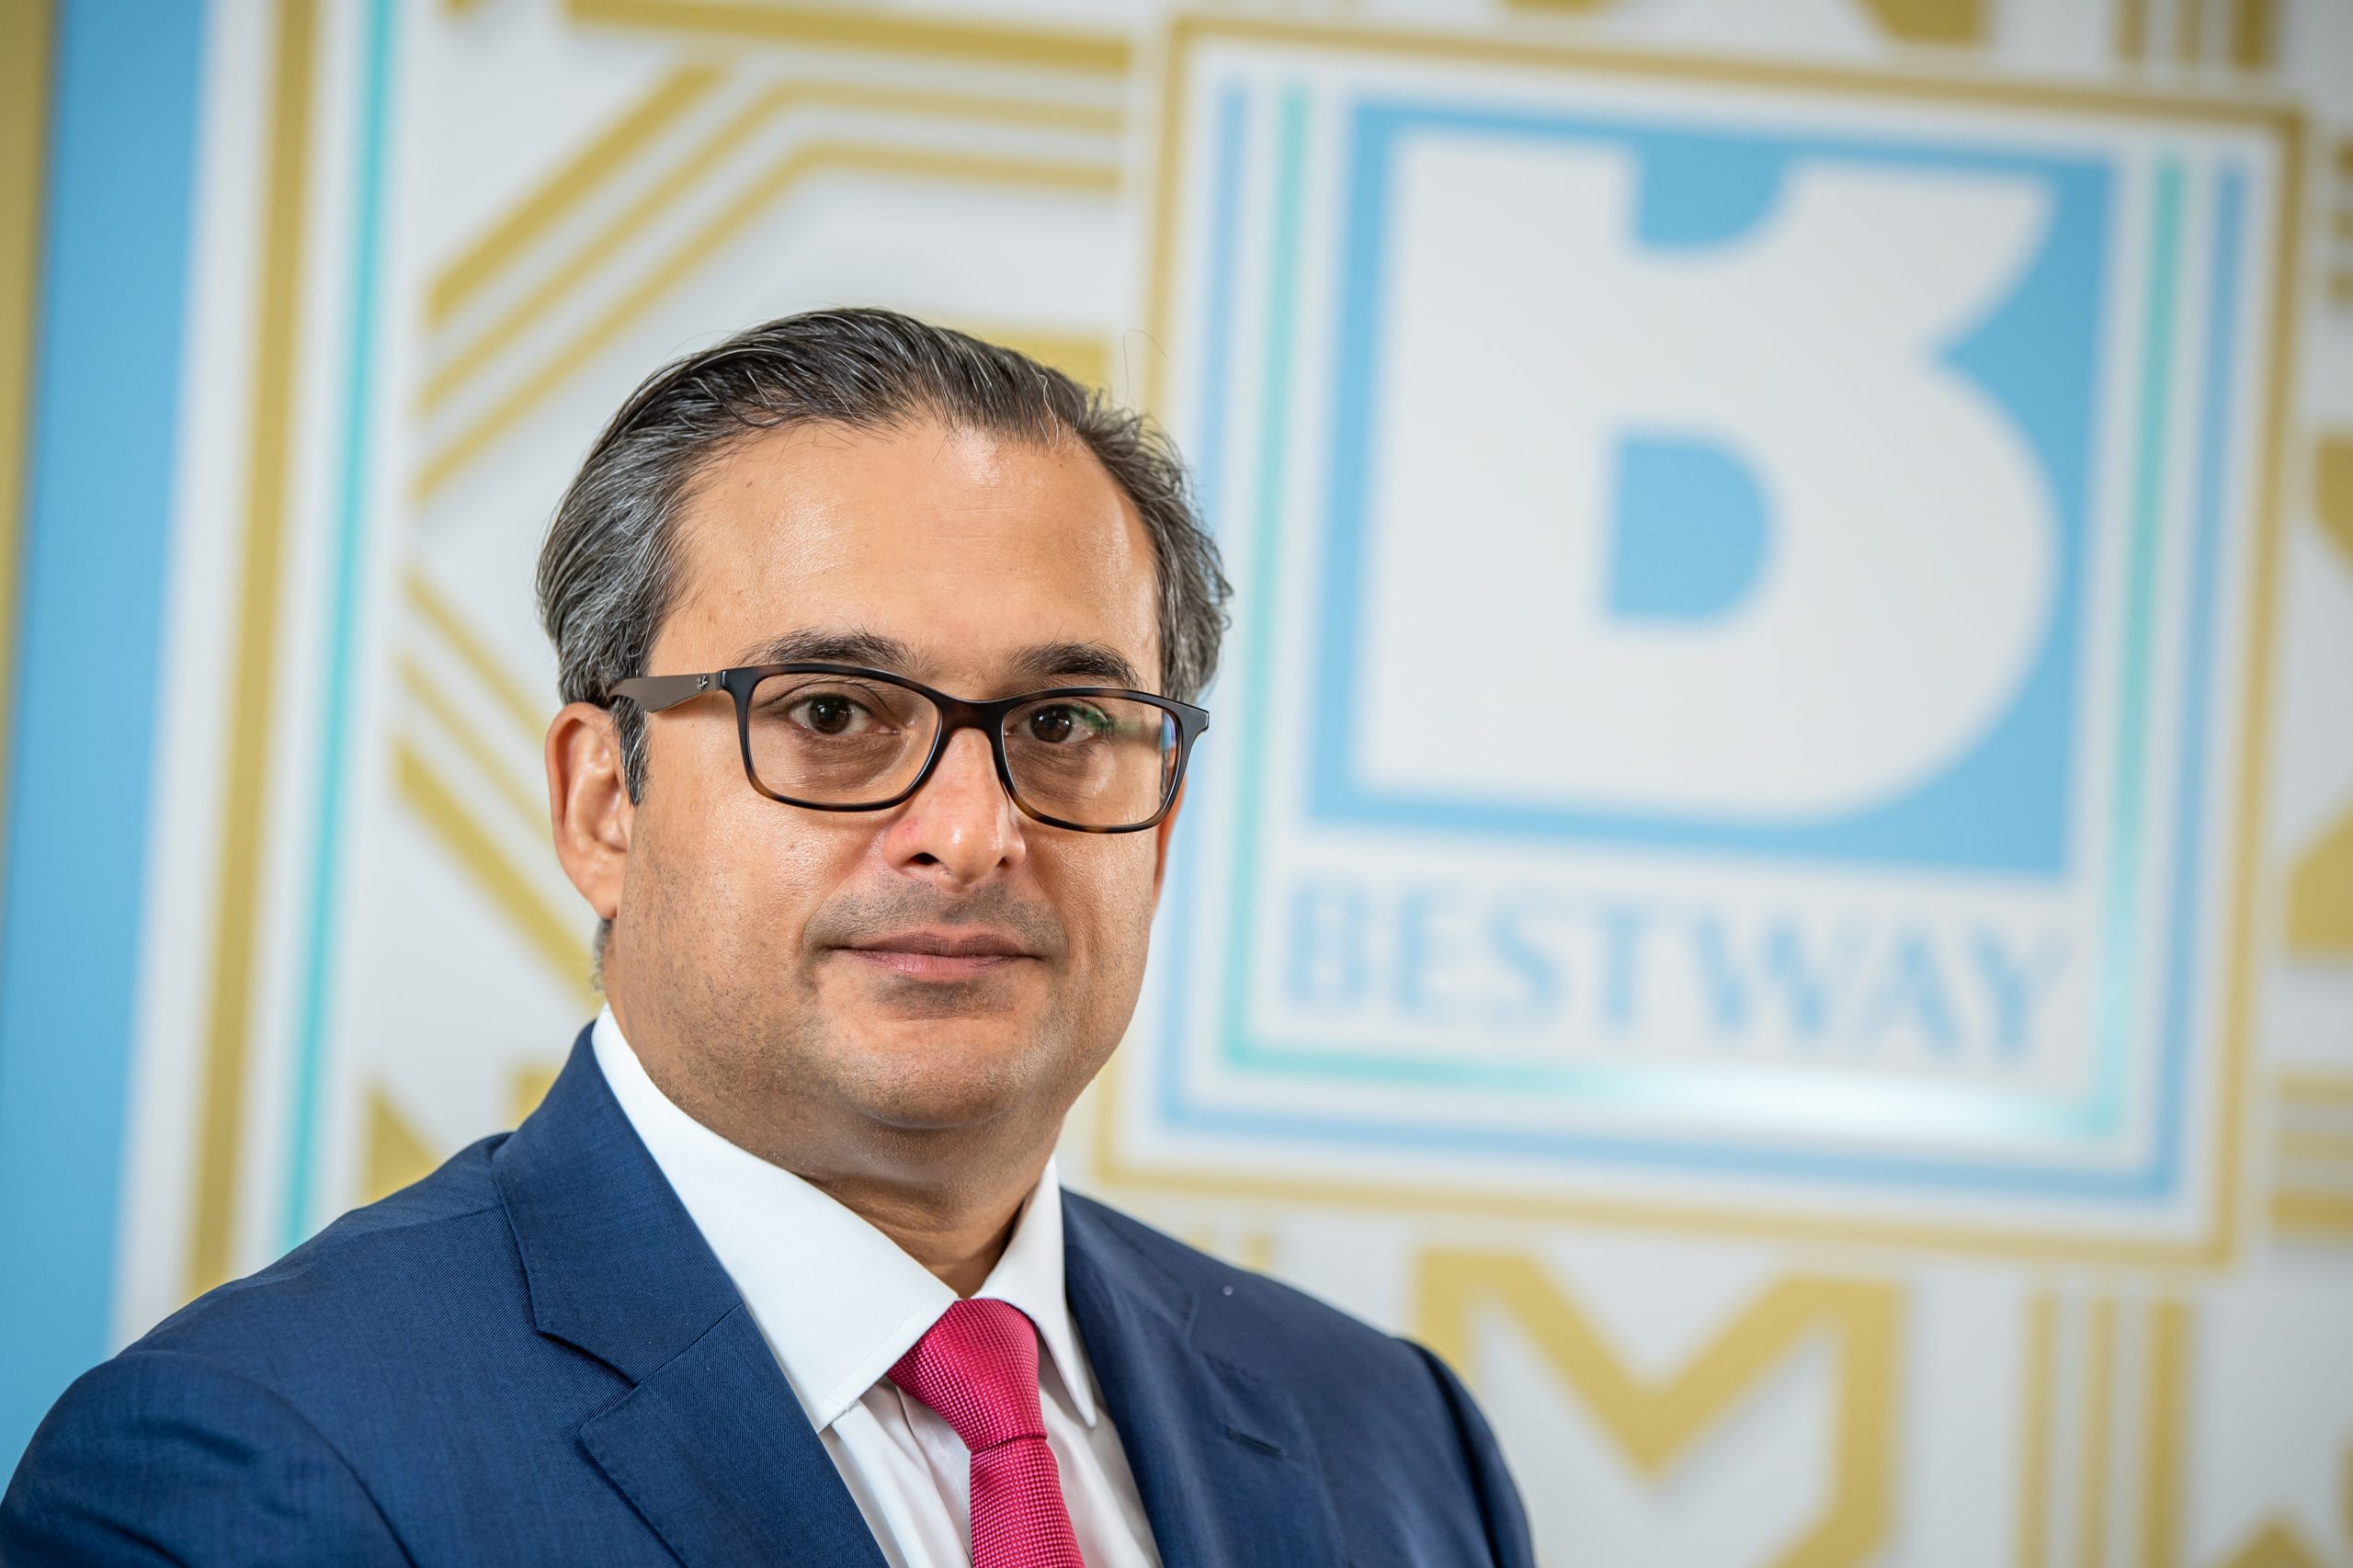 BESTWAY offering the ‘best way’ in retail – campaign to attract new retailers underway